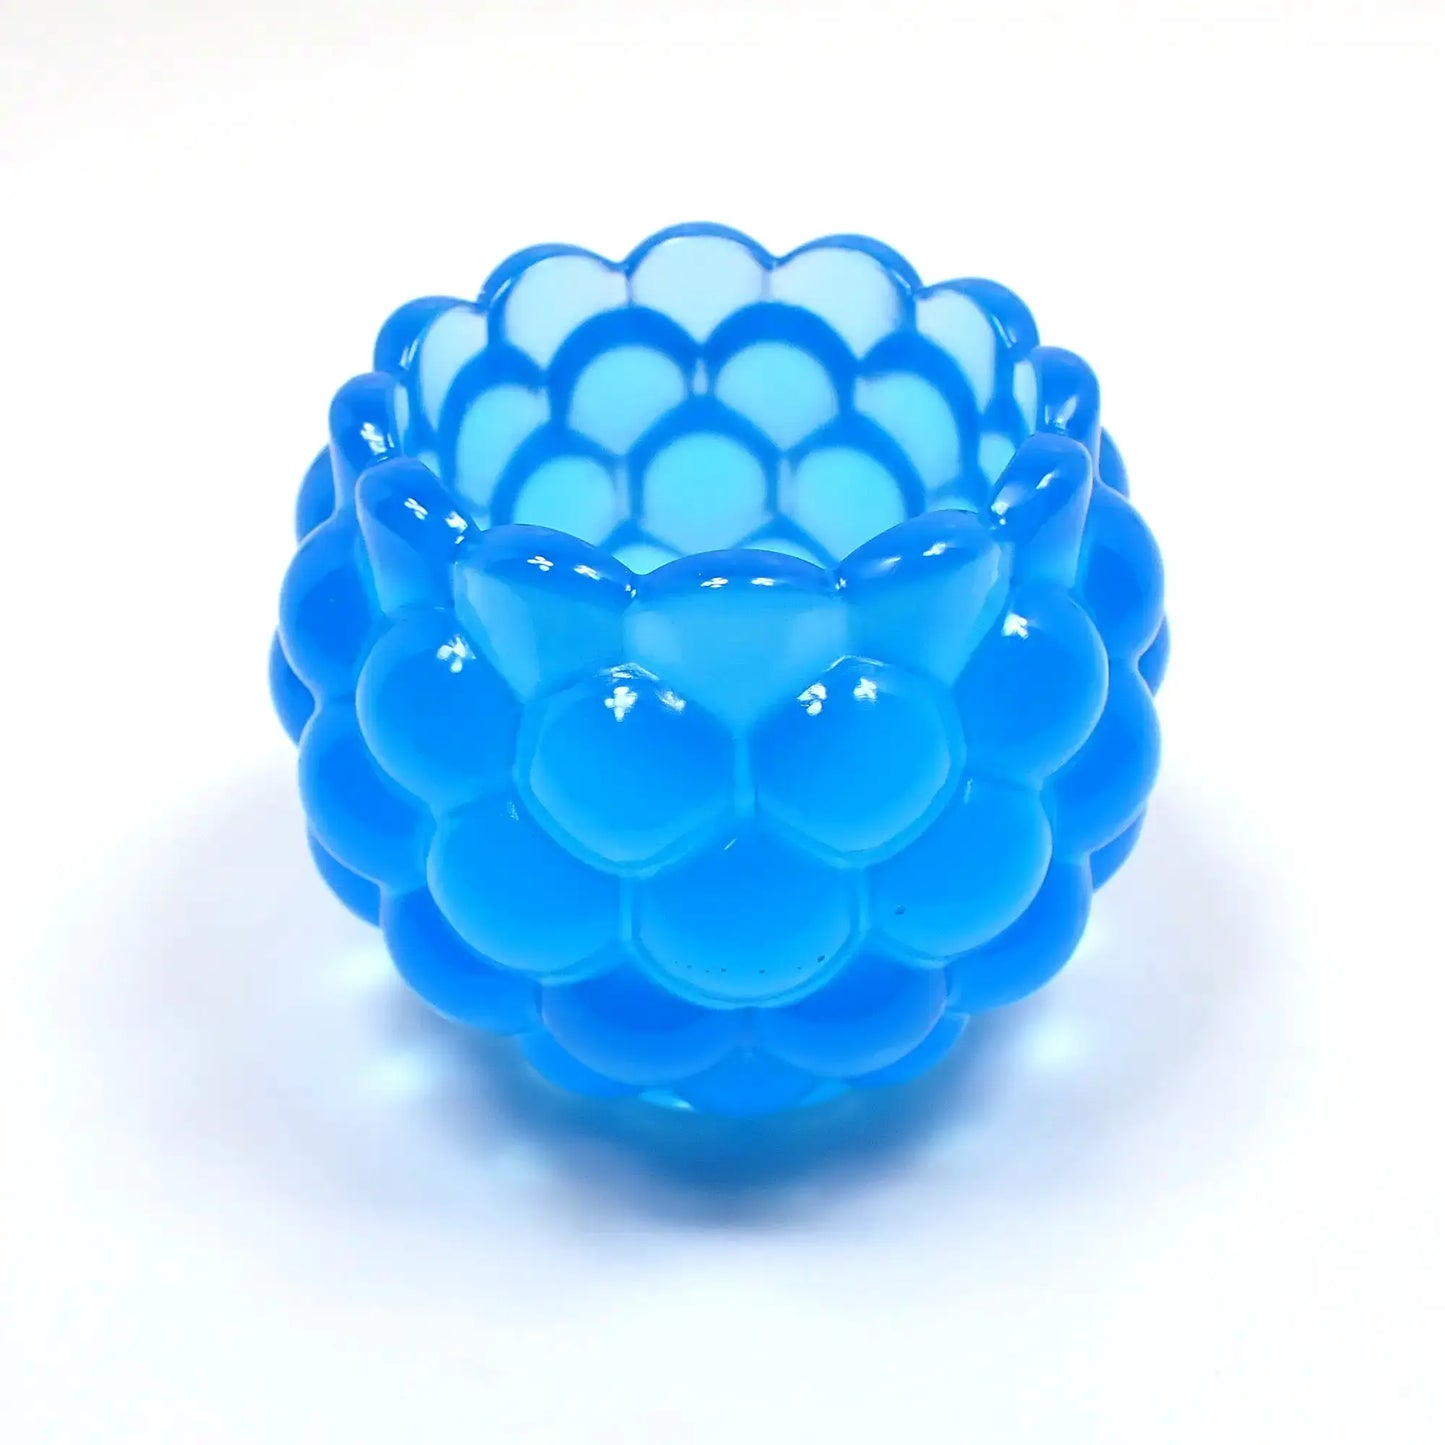 Small Handmade Round Neon Blue Resin Pot with Scalloped Edge